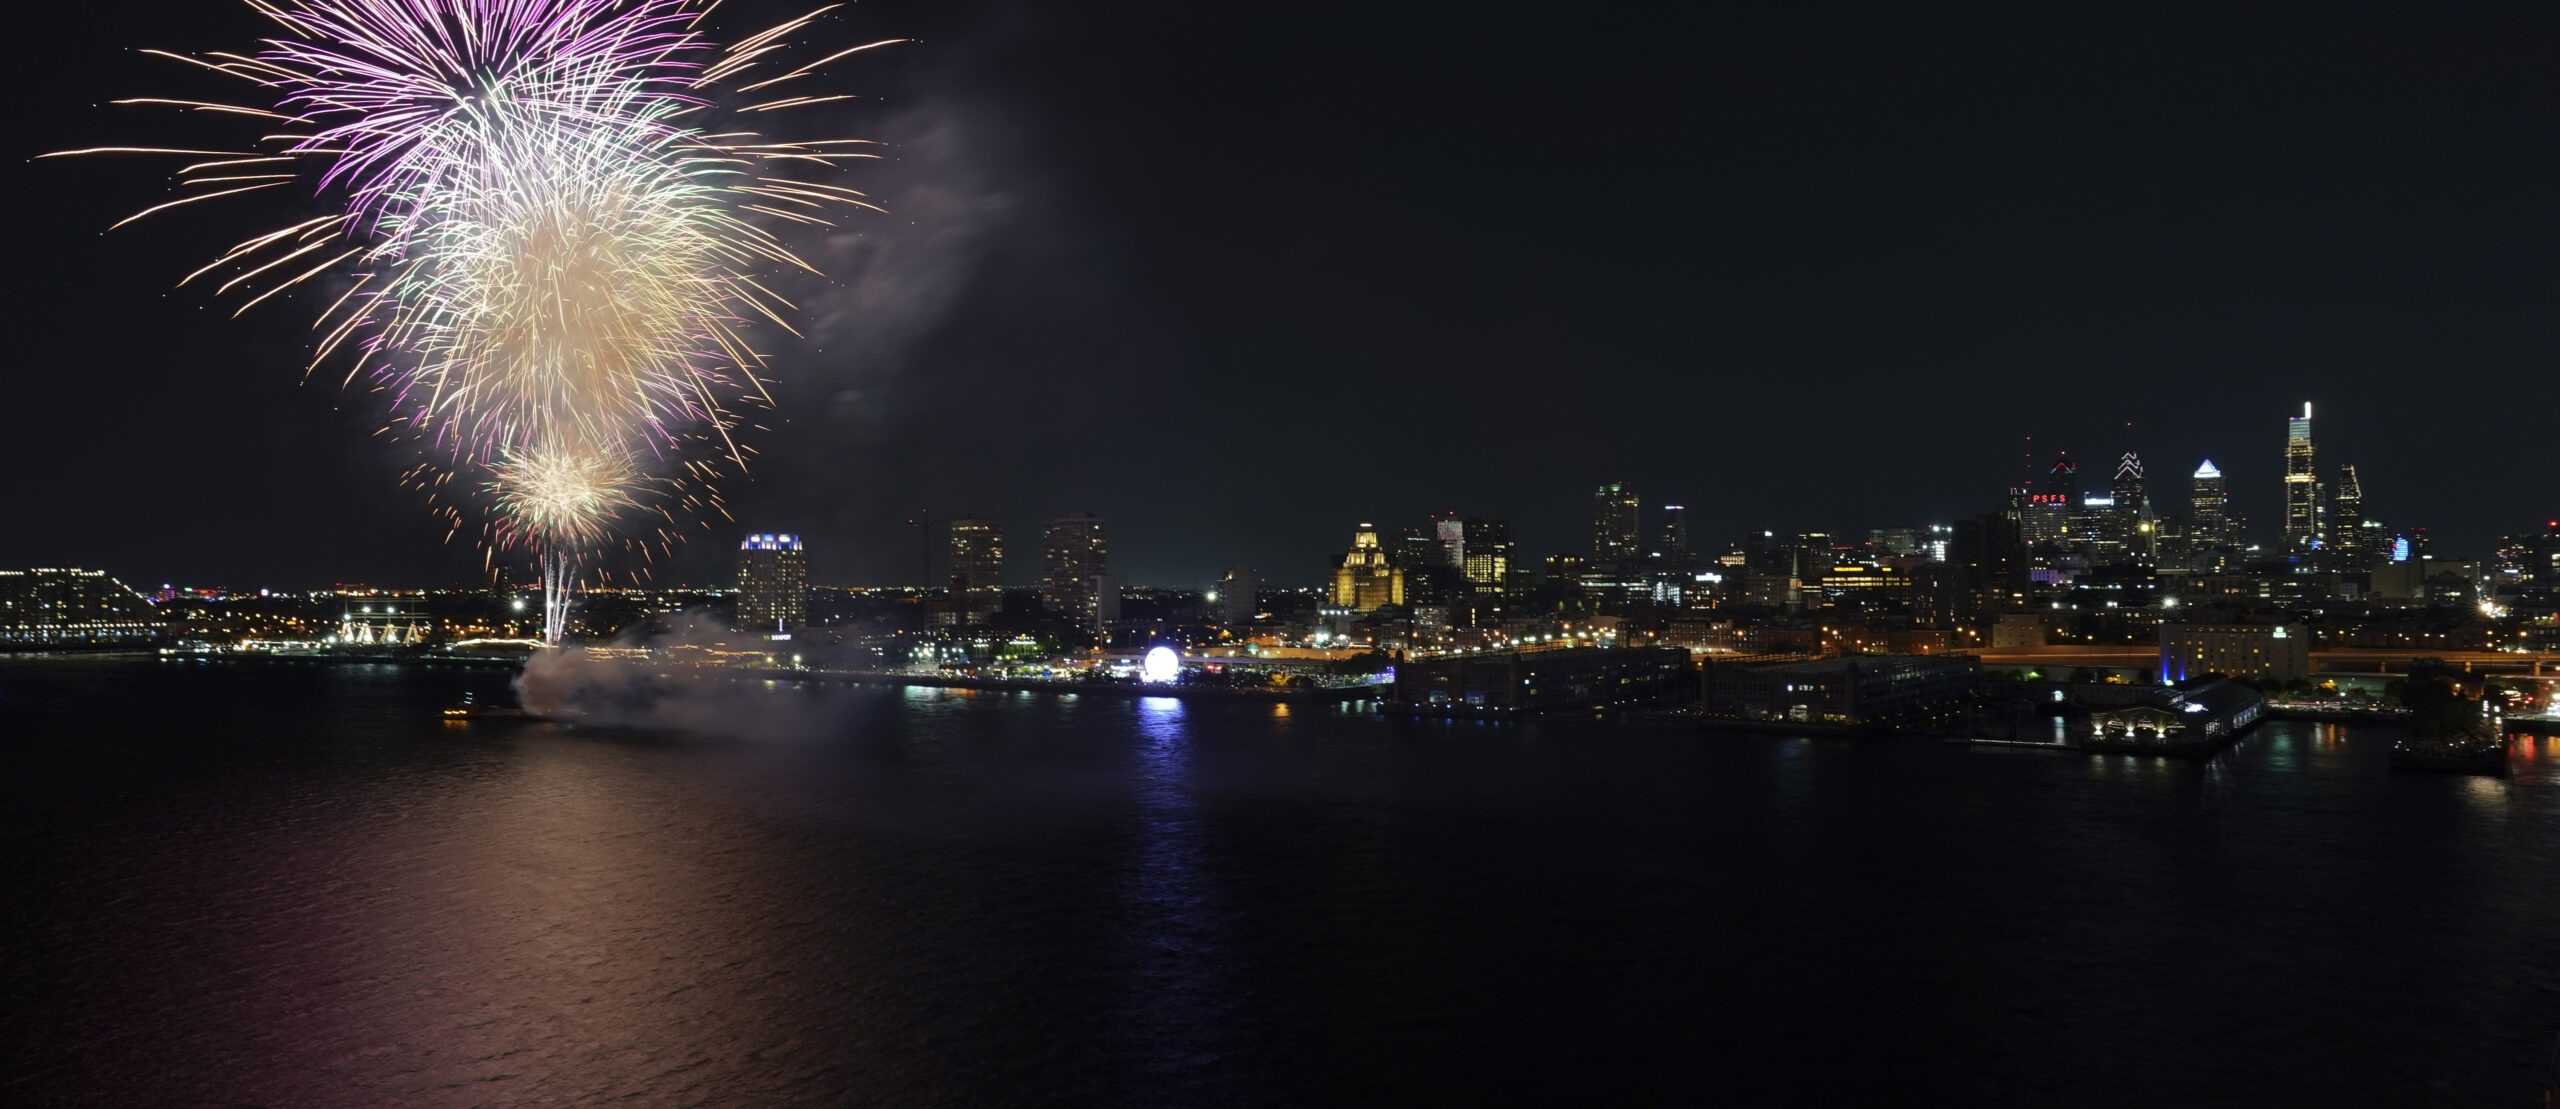 From big cities to small towns, see the most spectacular July 4th fireworks shows in the US